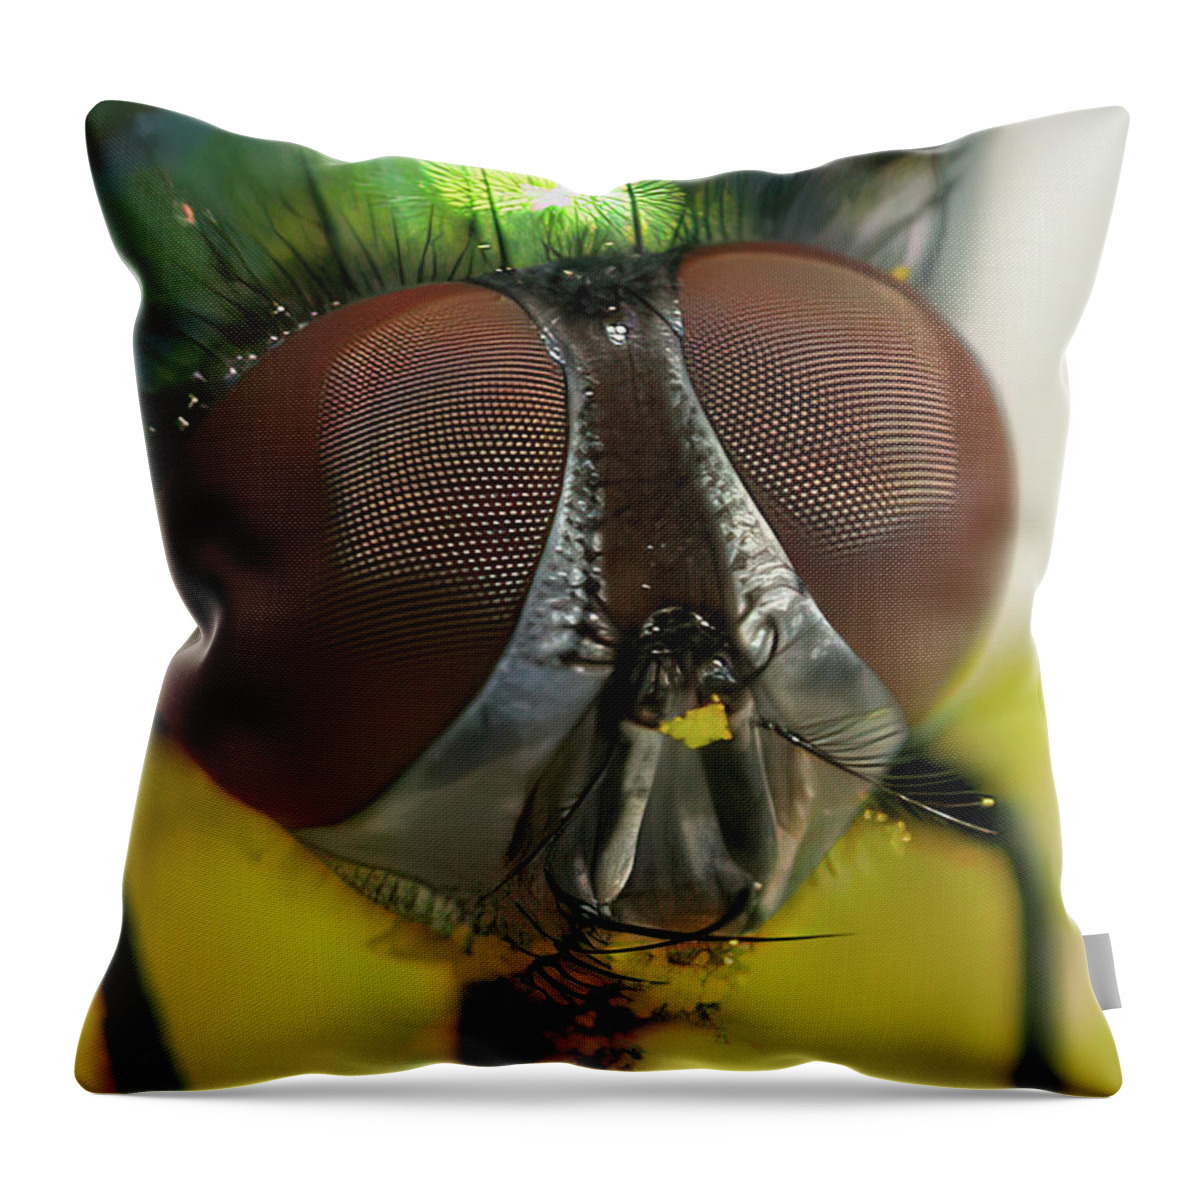 Fly Throw Pillow featuring the photograph Bugged Eyed by Lens Art Photography By Larry Trager